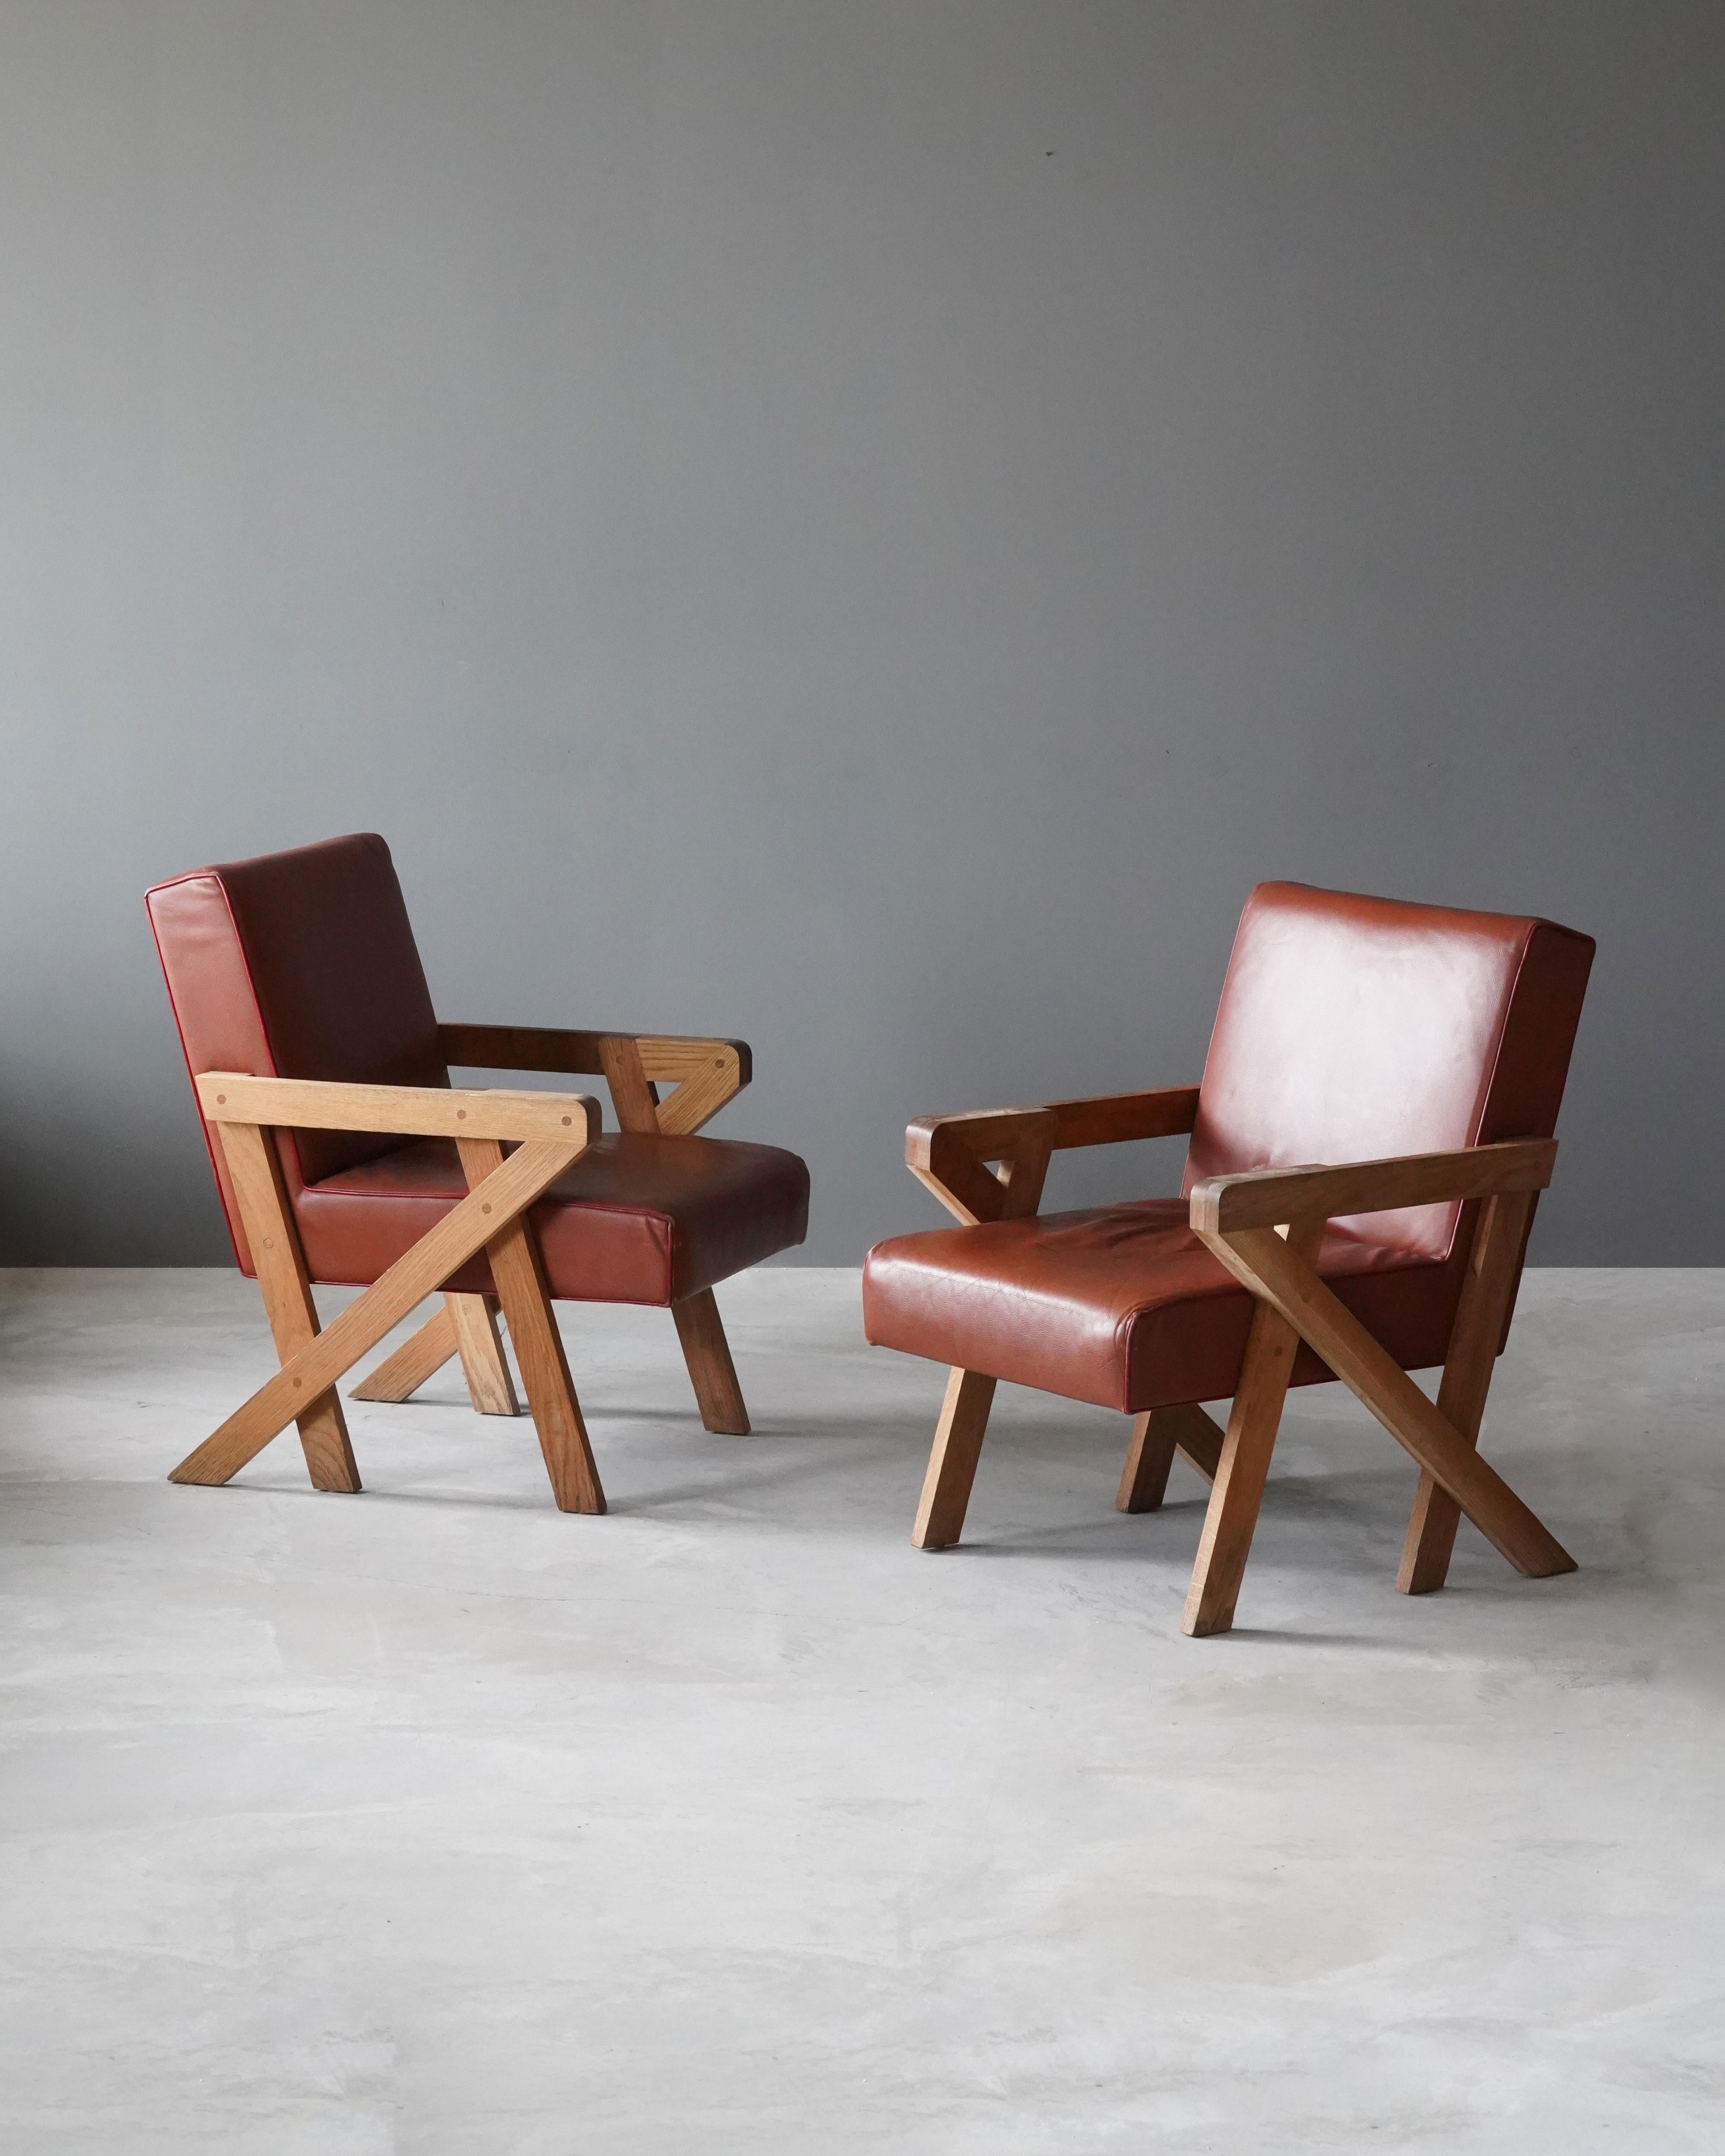 A pair of site specific armchairs chairs from a restaurant named Pop Pub in New York. Designed and produced by Turkish-American designer Ali Tayar in 2011.

Solid oak and featuring it's original leather.